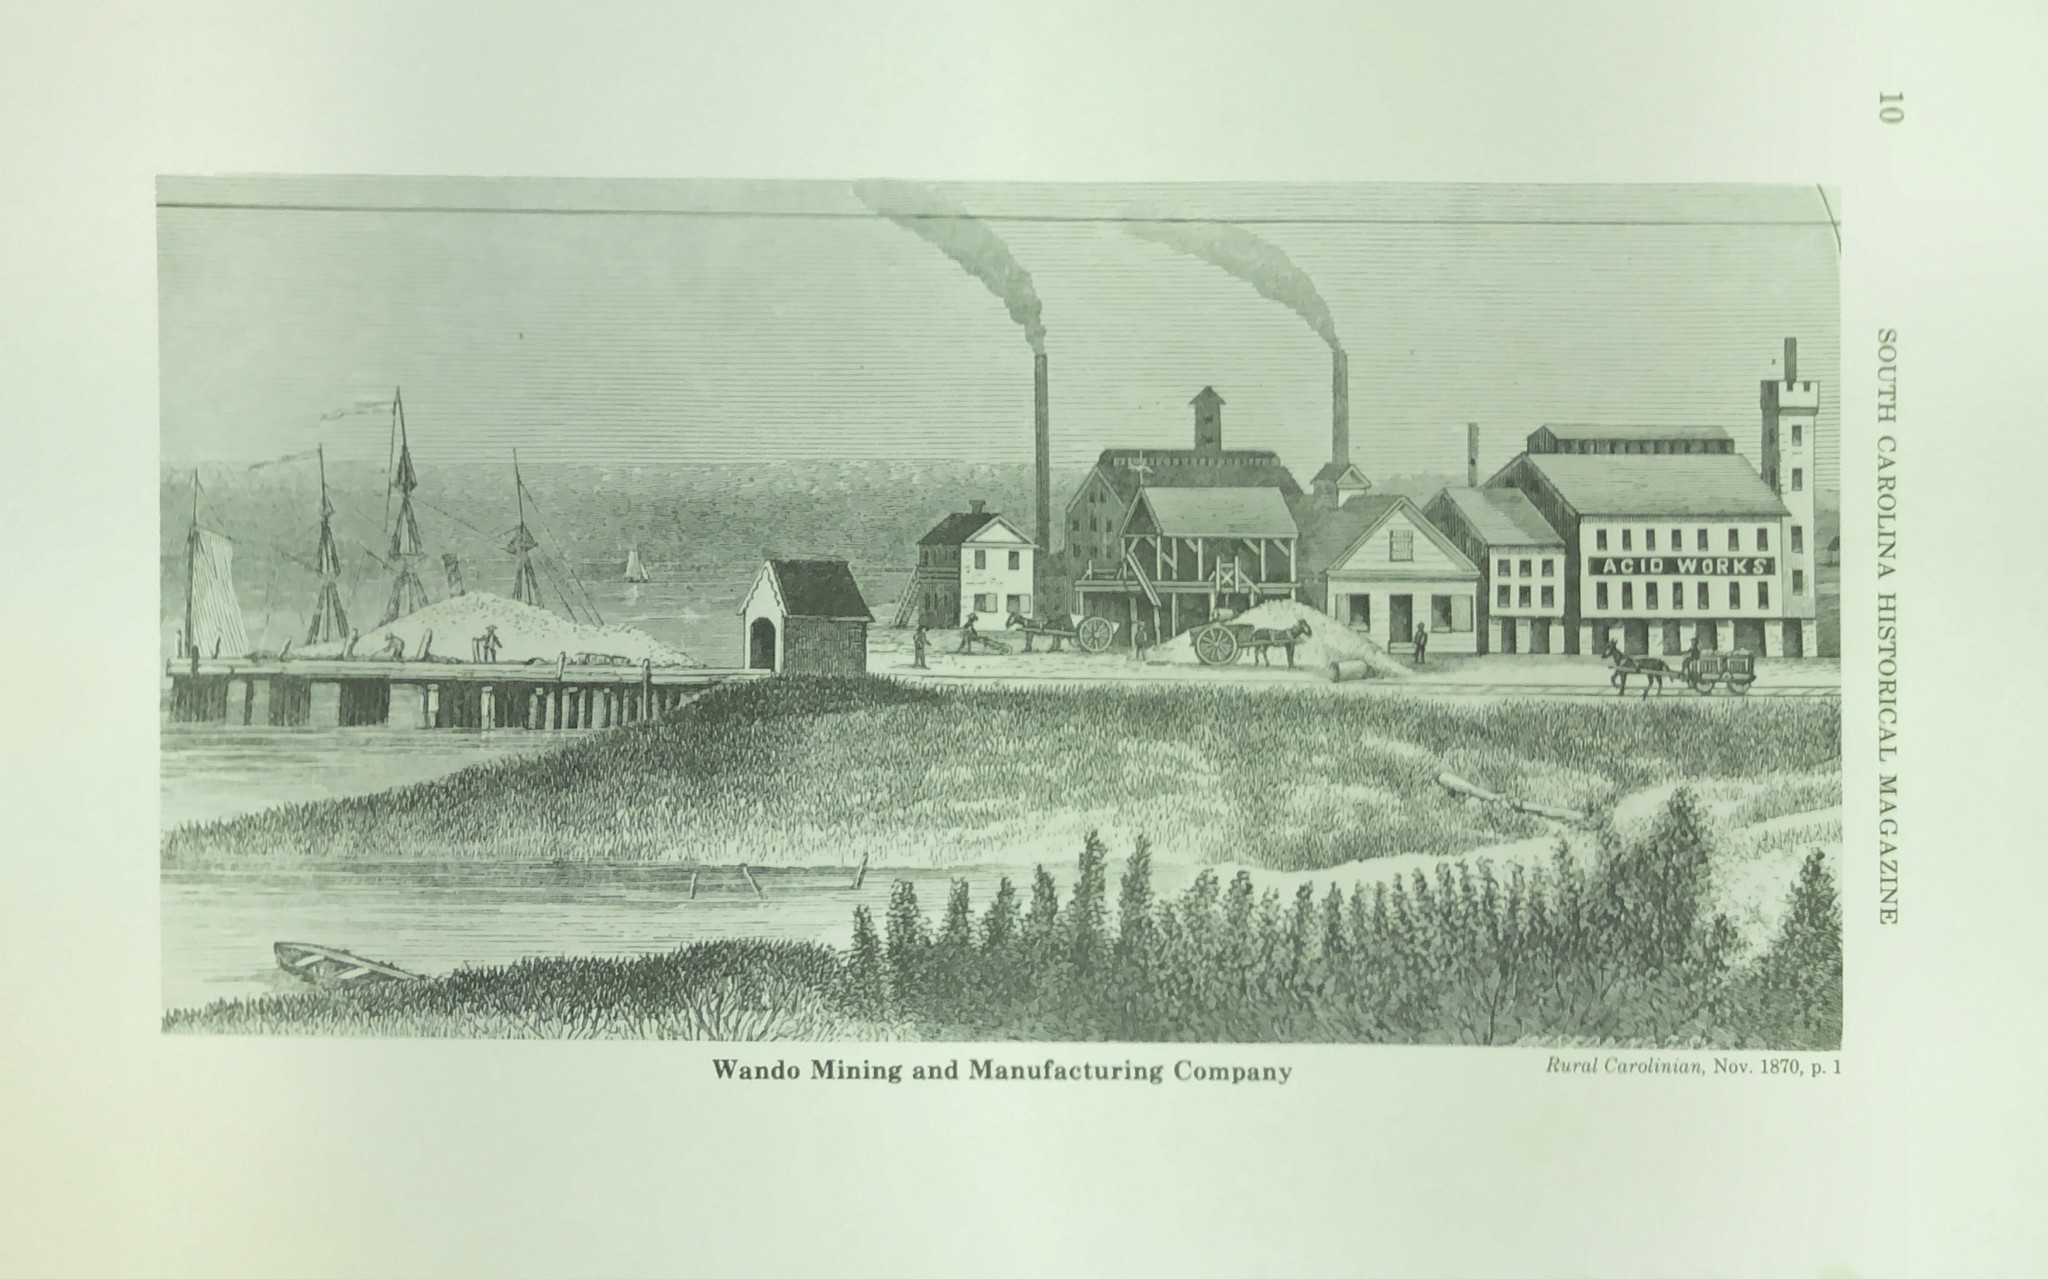 Image of the Wando Mining and Manufacturing Co., ca. 1870; Courtesy of the SCHM, 1985